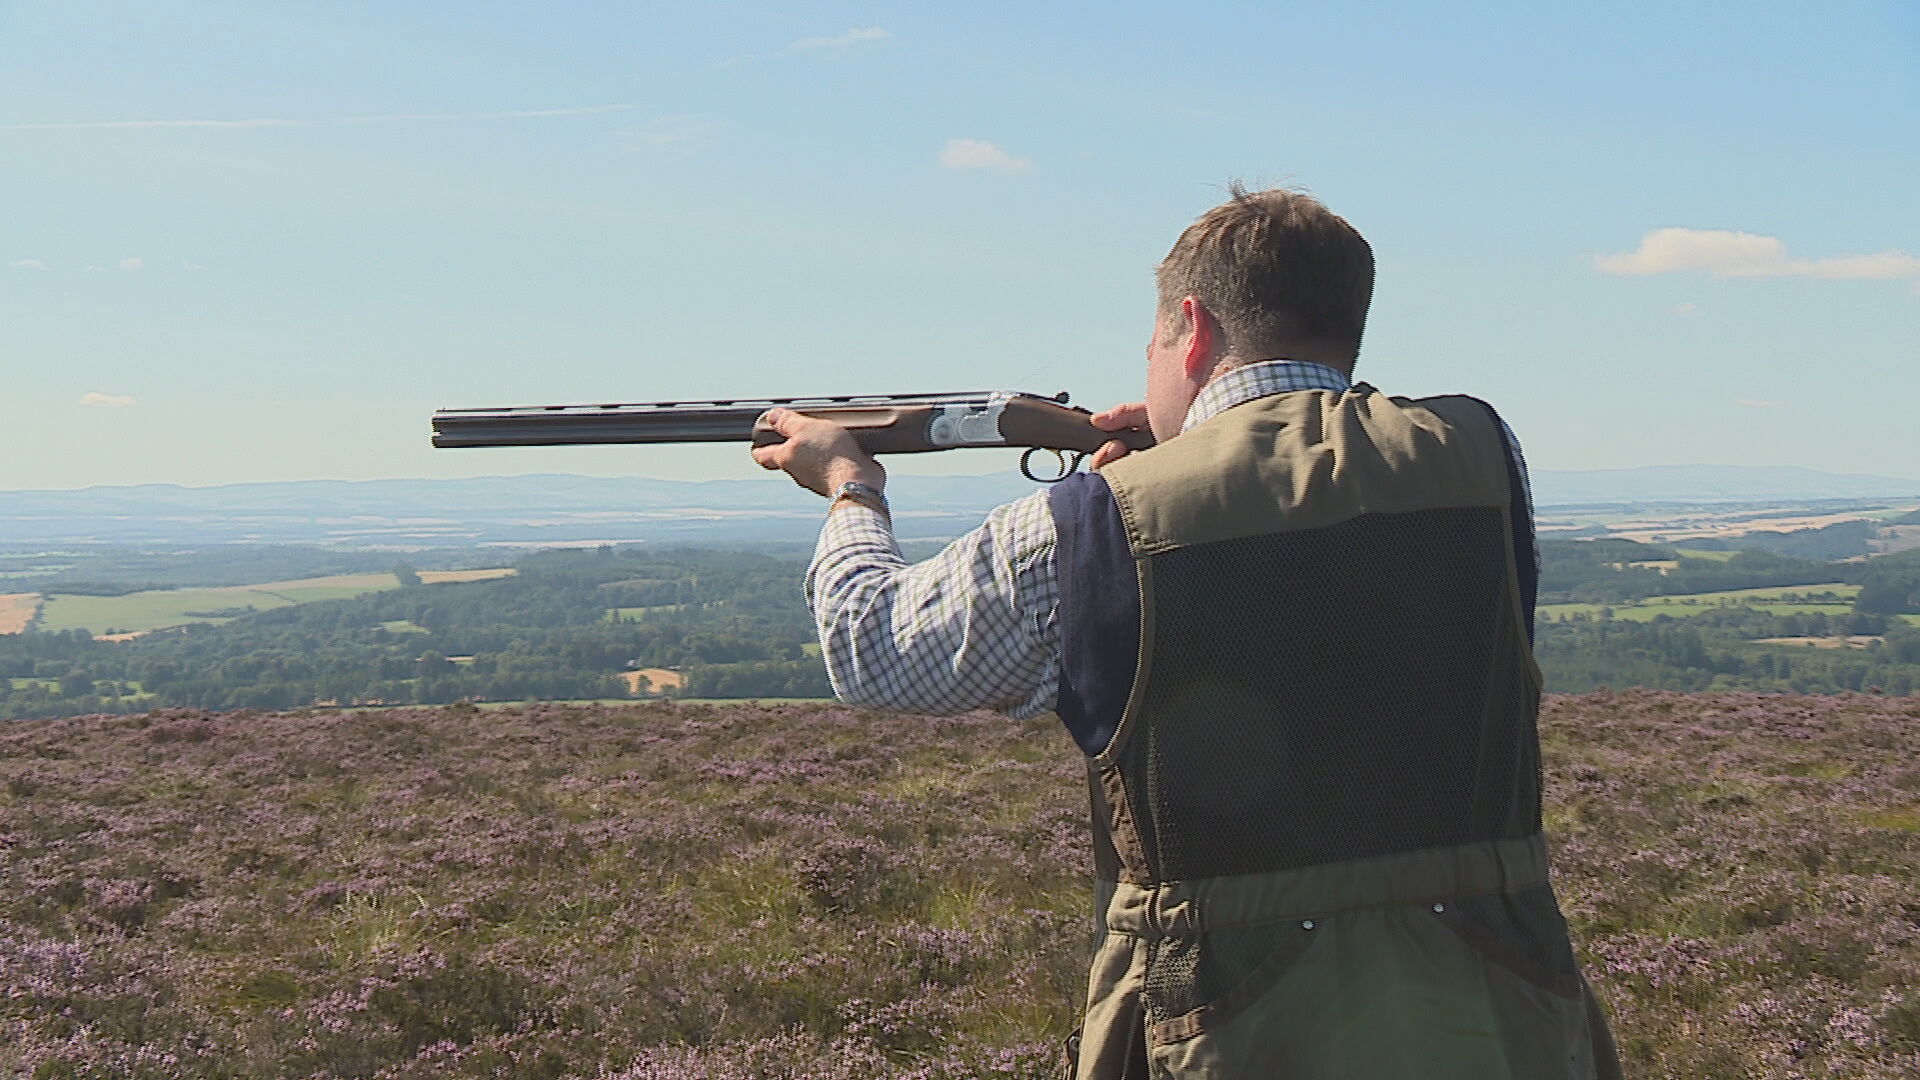 Grouse shooting will be dependent on legal management practices under the new law. Photo: STV News.